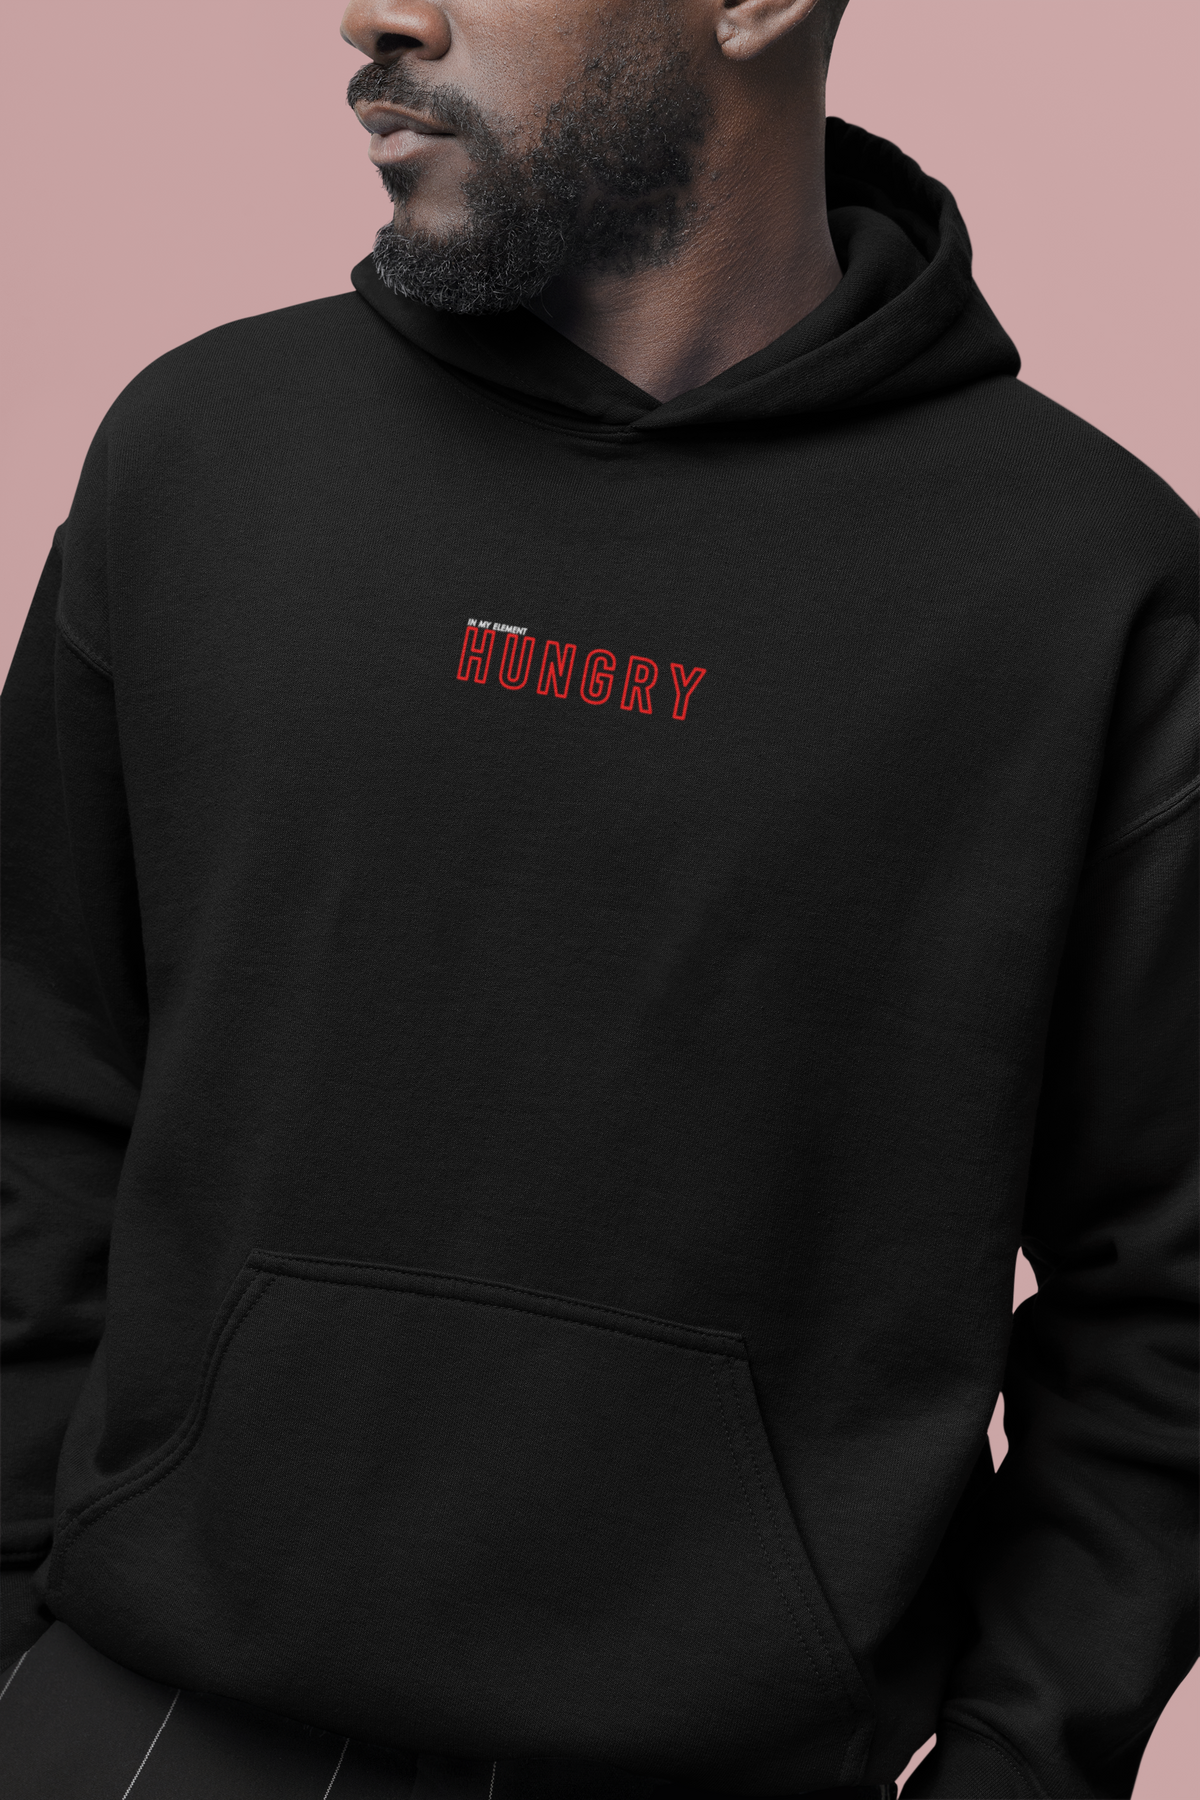 Hungry Unisex relaxed fit Hoodie